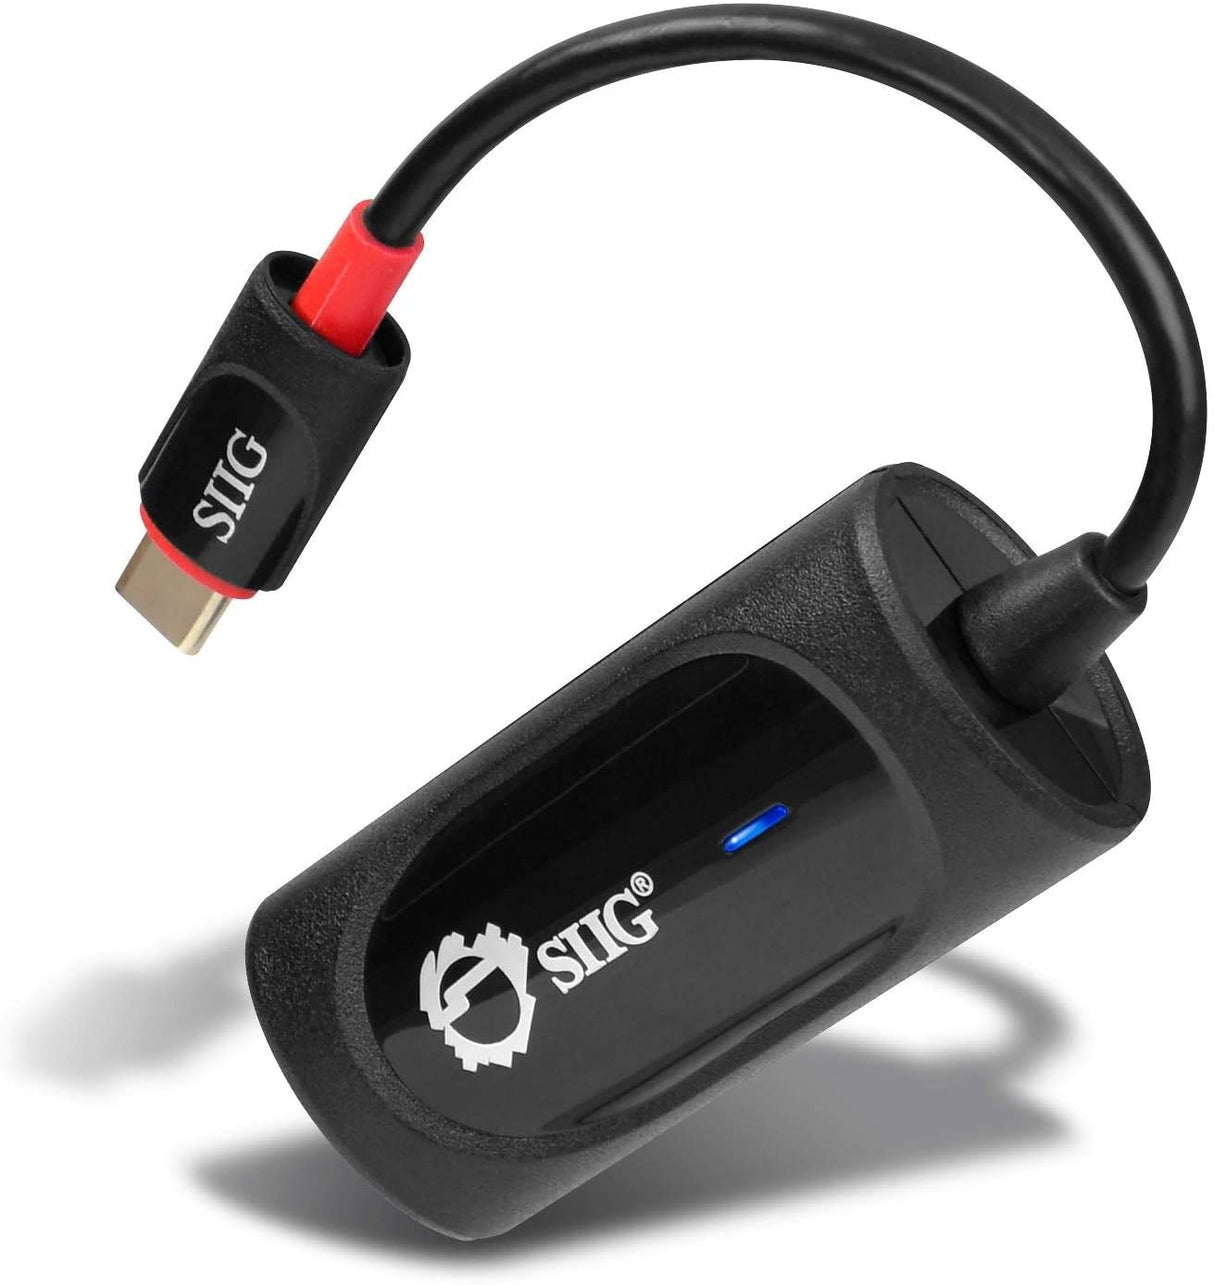 SIIG USB Type C to Gigabit Ethernet Adapter - 10/100/1000 Mbps LAN adapter for Windows and Mac Systems, Thunderbolt 3 (Black) Black - USB C